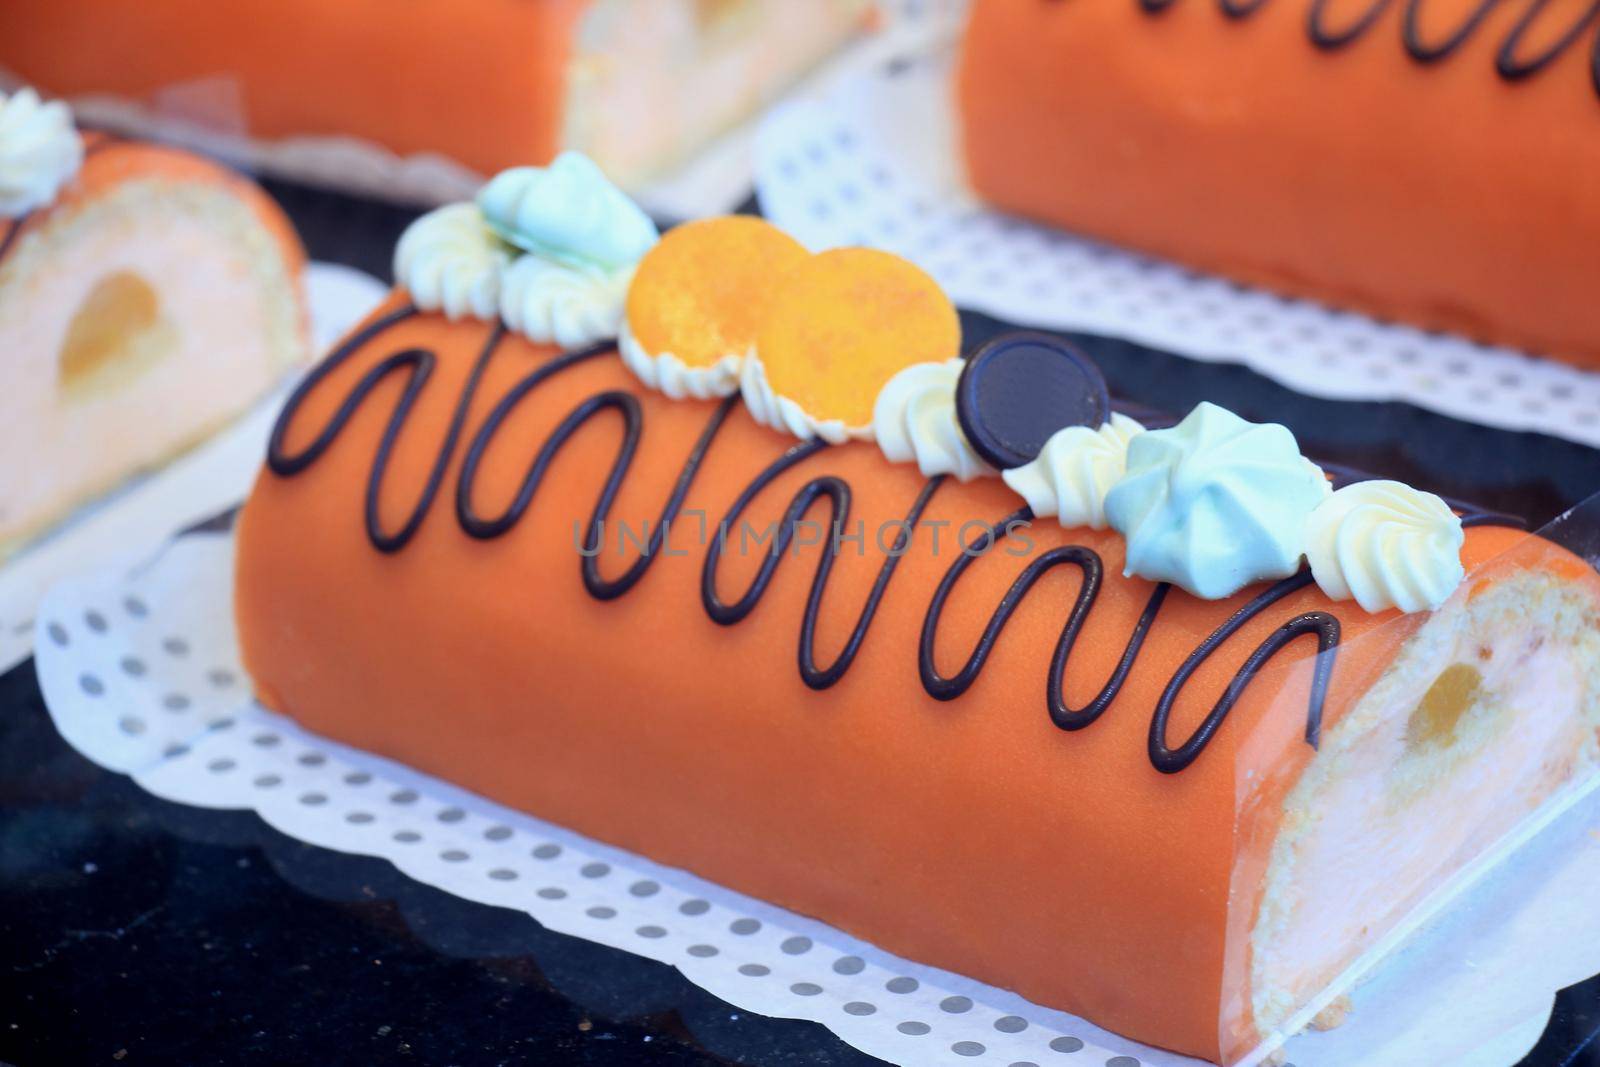 Orange marzipan confectionery, filled with cream and decorated with chocolate, on display in a shop by studioportosabbia